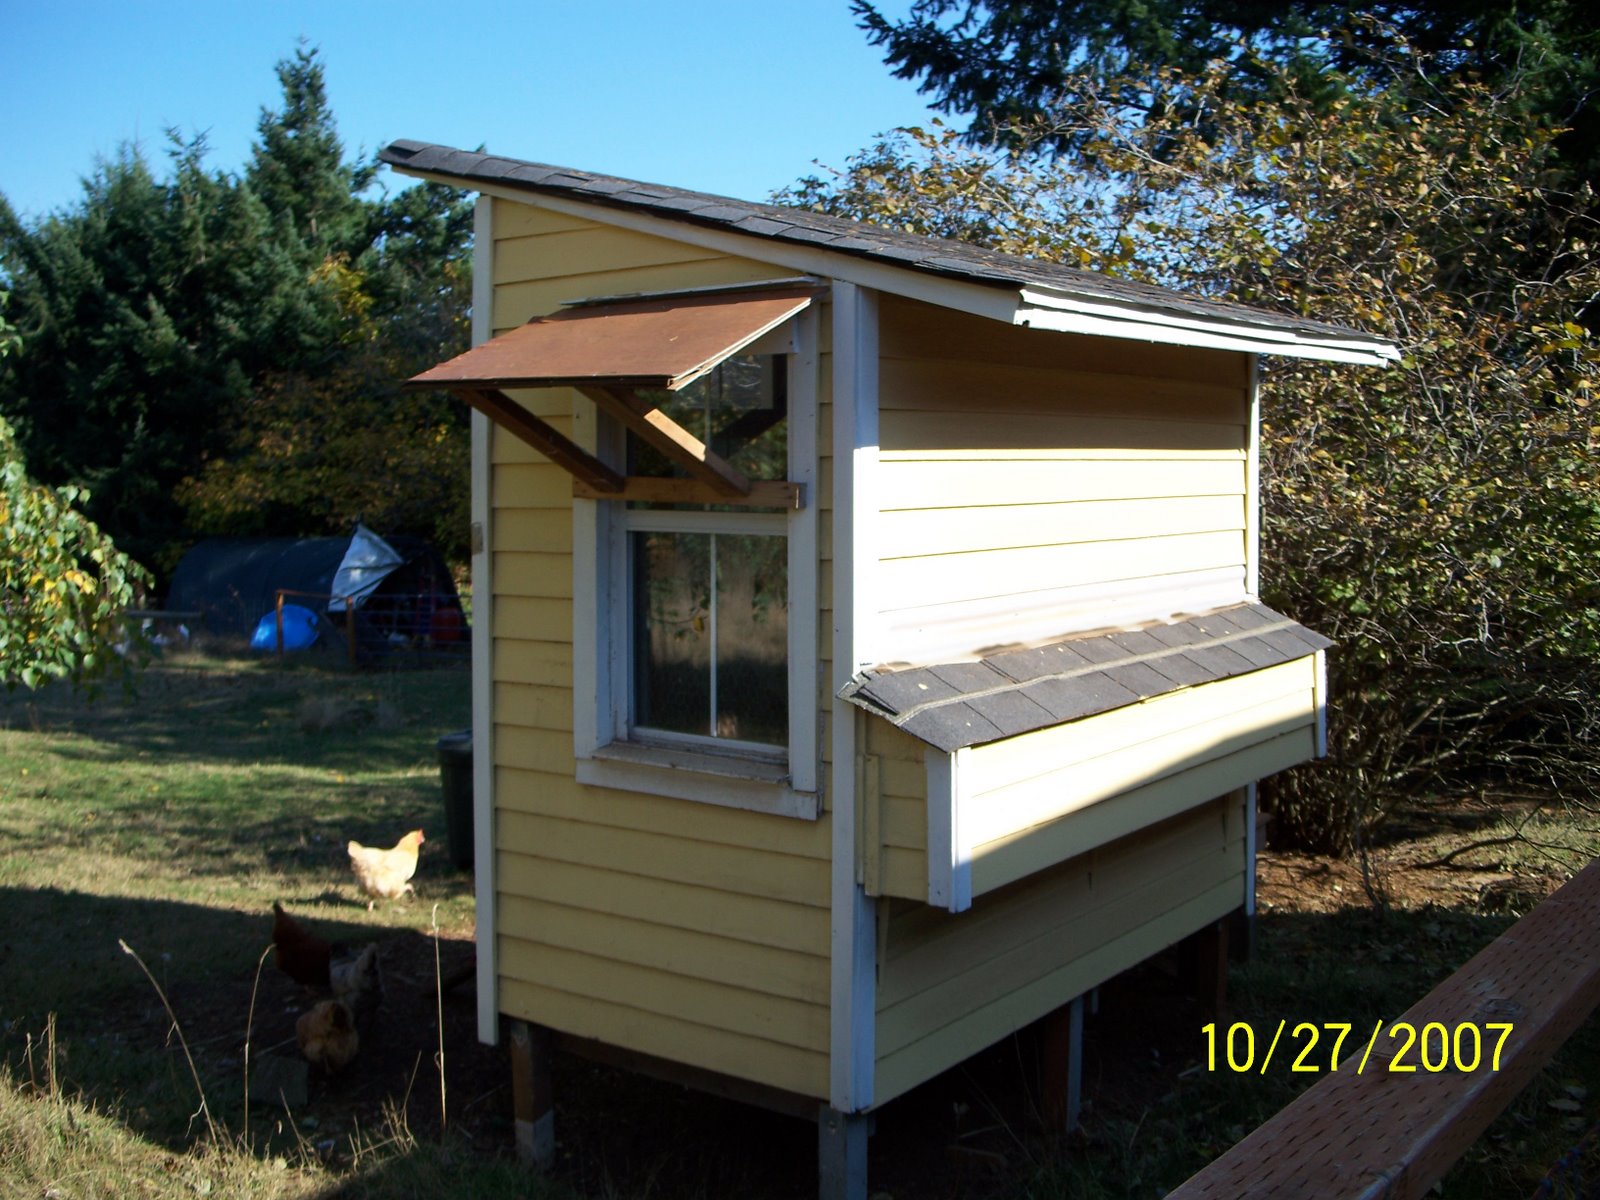 Free Chicken Coop Plans - build a coop for less money